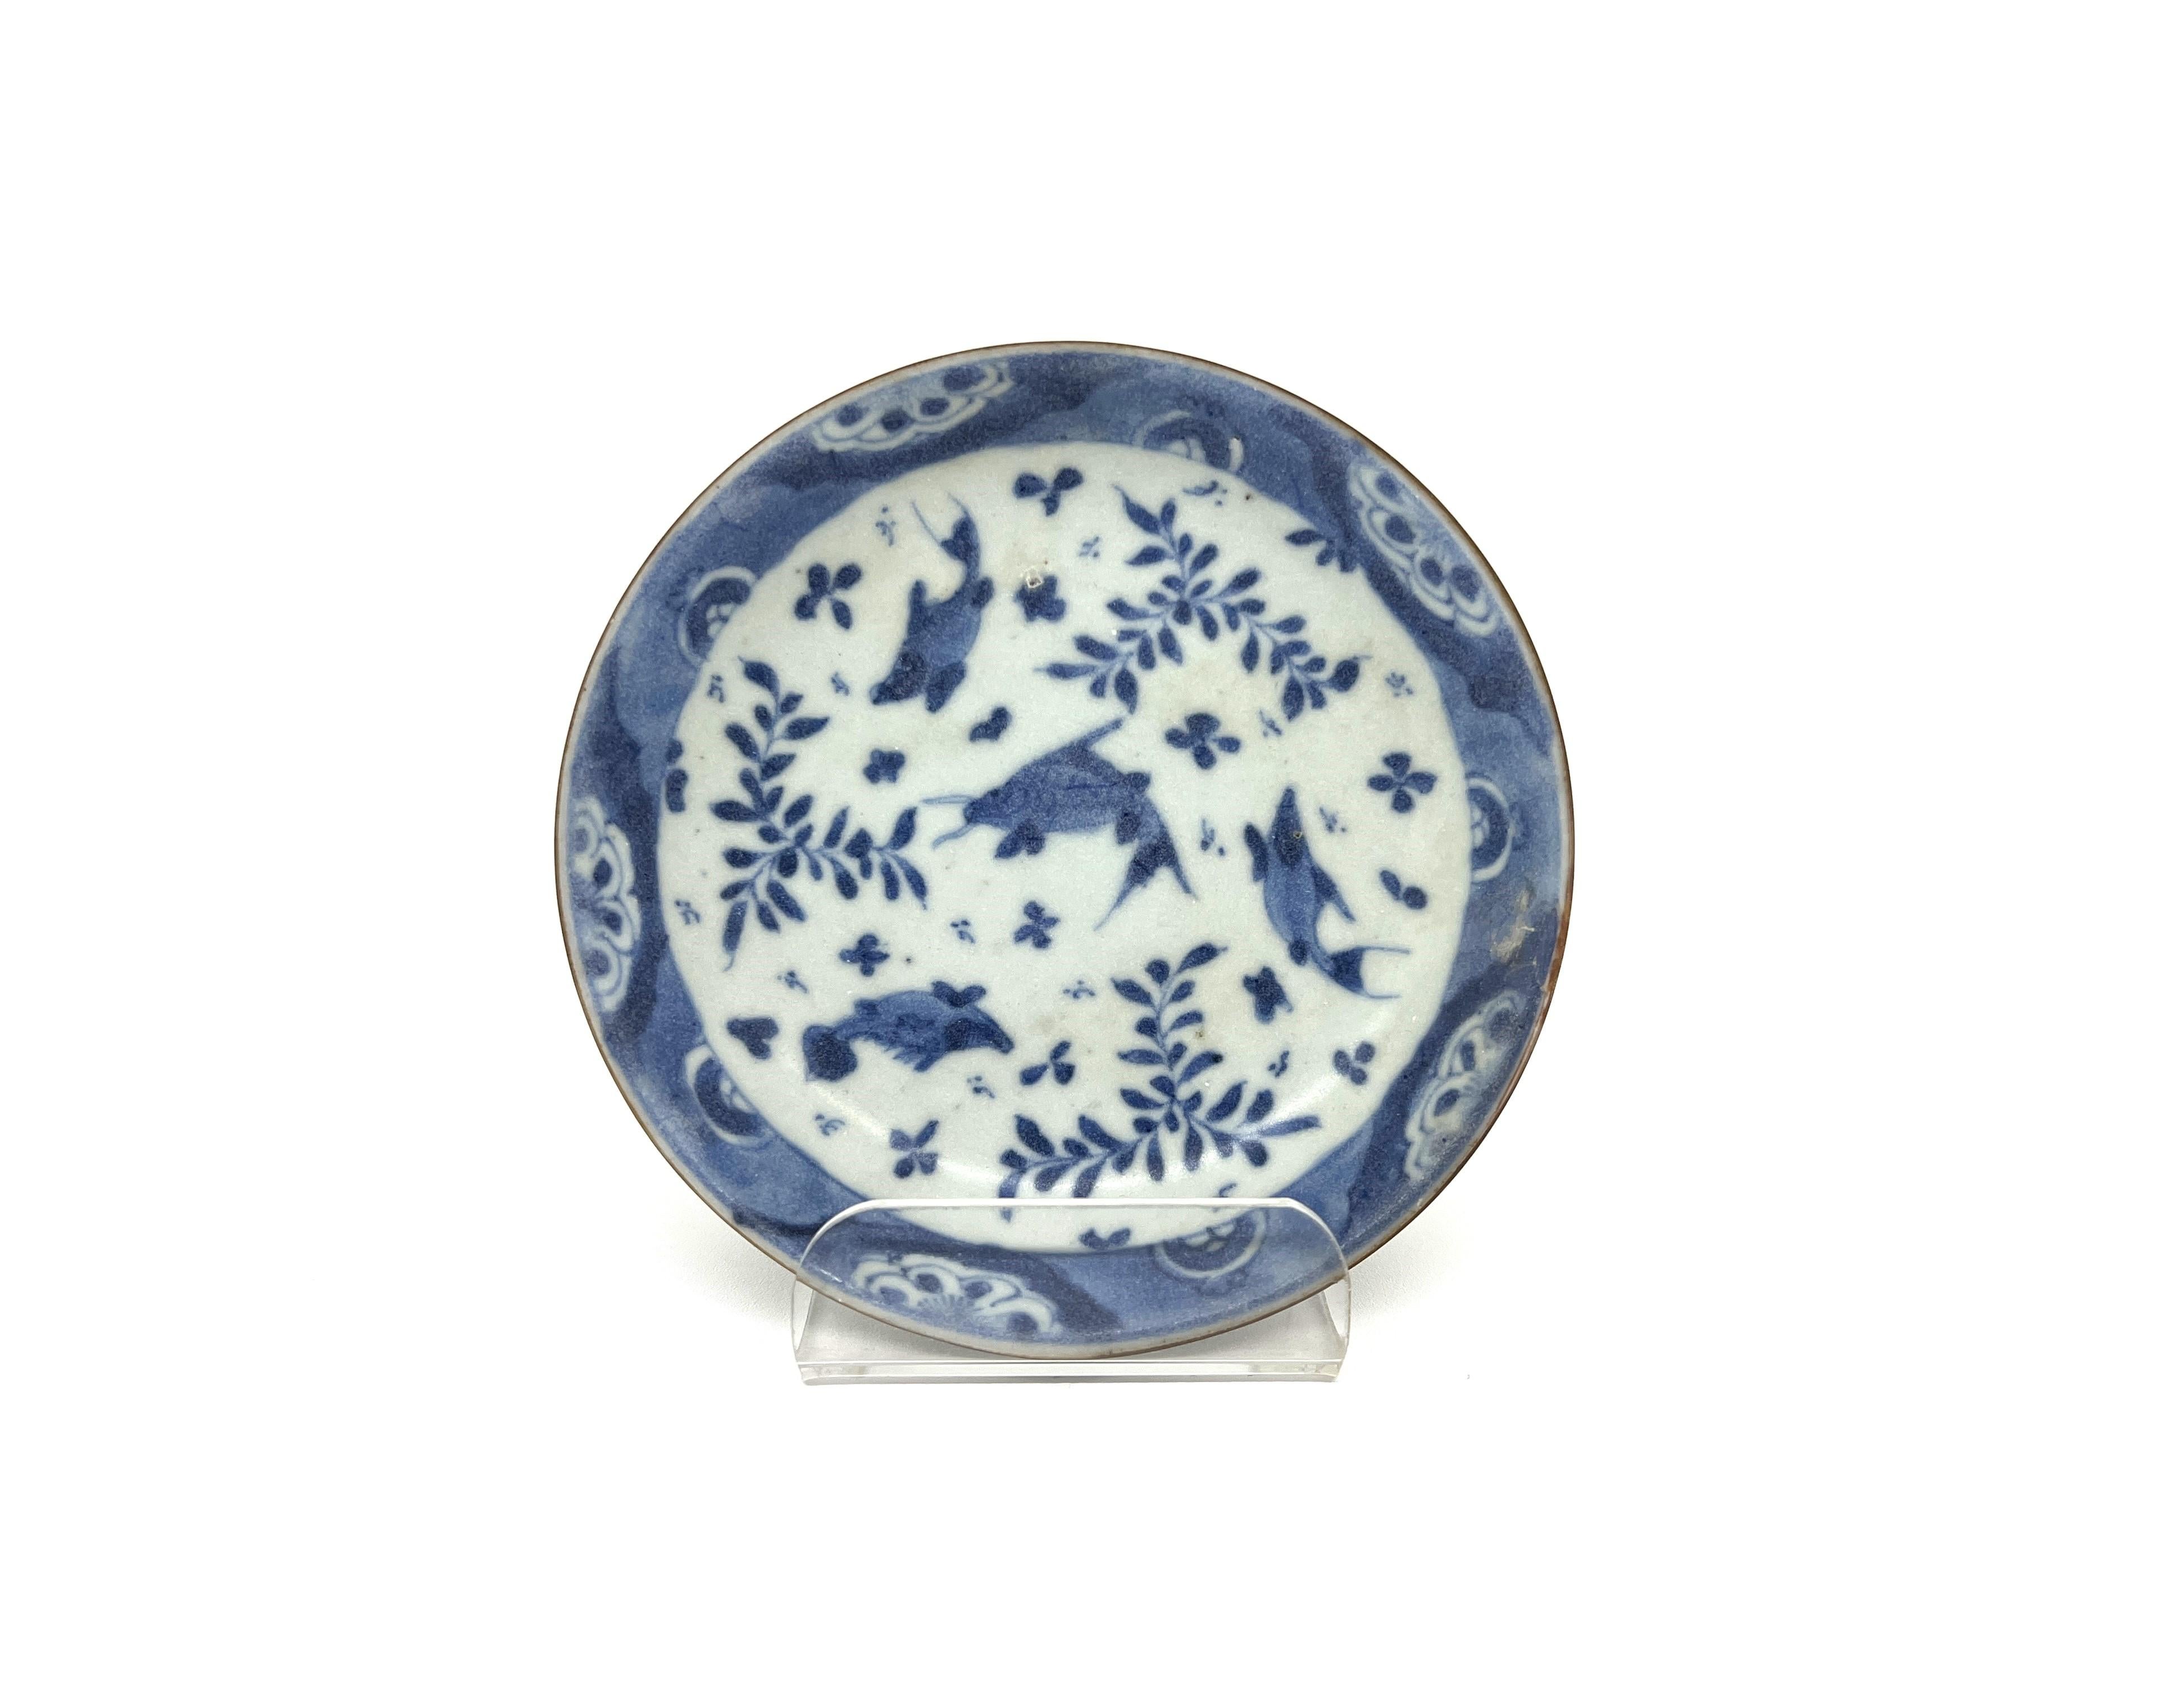 Chinese Fish and Waterweed Teabowl and Saucer Set, c 1725, Qing Dynasty, Yongzheng era For Sale